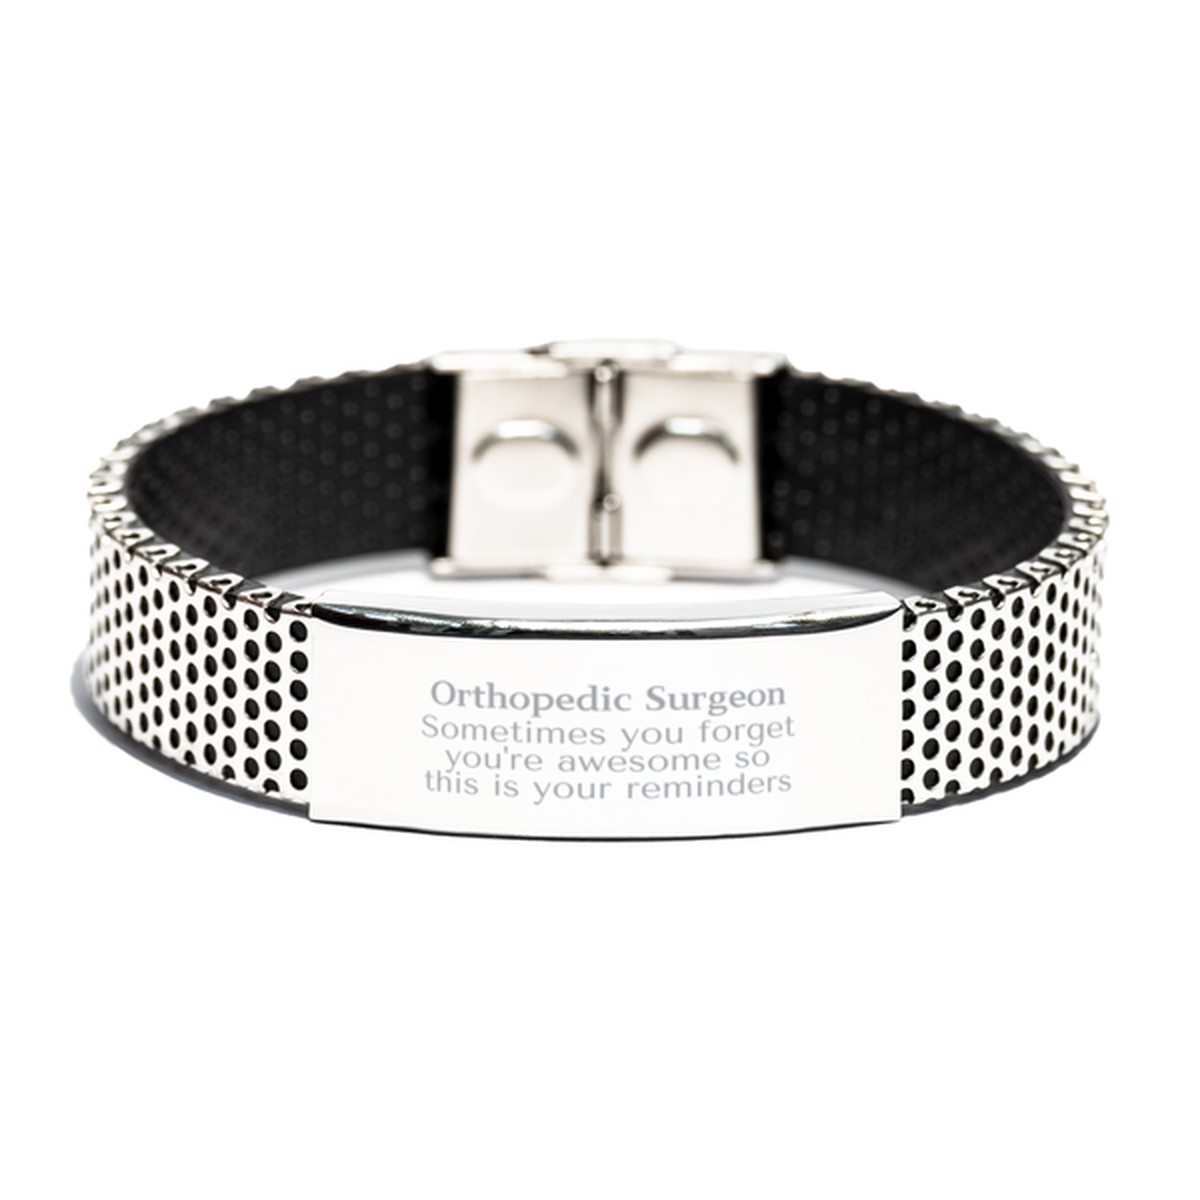 Sentimental Orthopedic Surgeon Stainless Steel Bracelet, Orthopedic Surgeon Sometimes you forget you're awesome so this is your reminders, Graduation Christmas Birthday Gifts for Orthopedic Surgeon, Men, Women, Coworkers